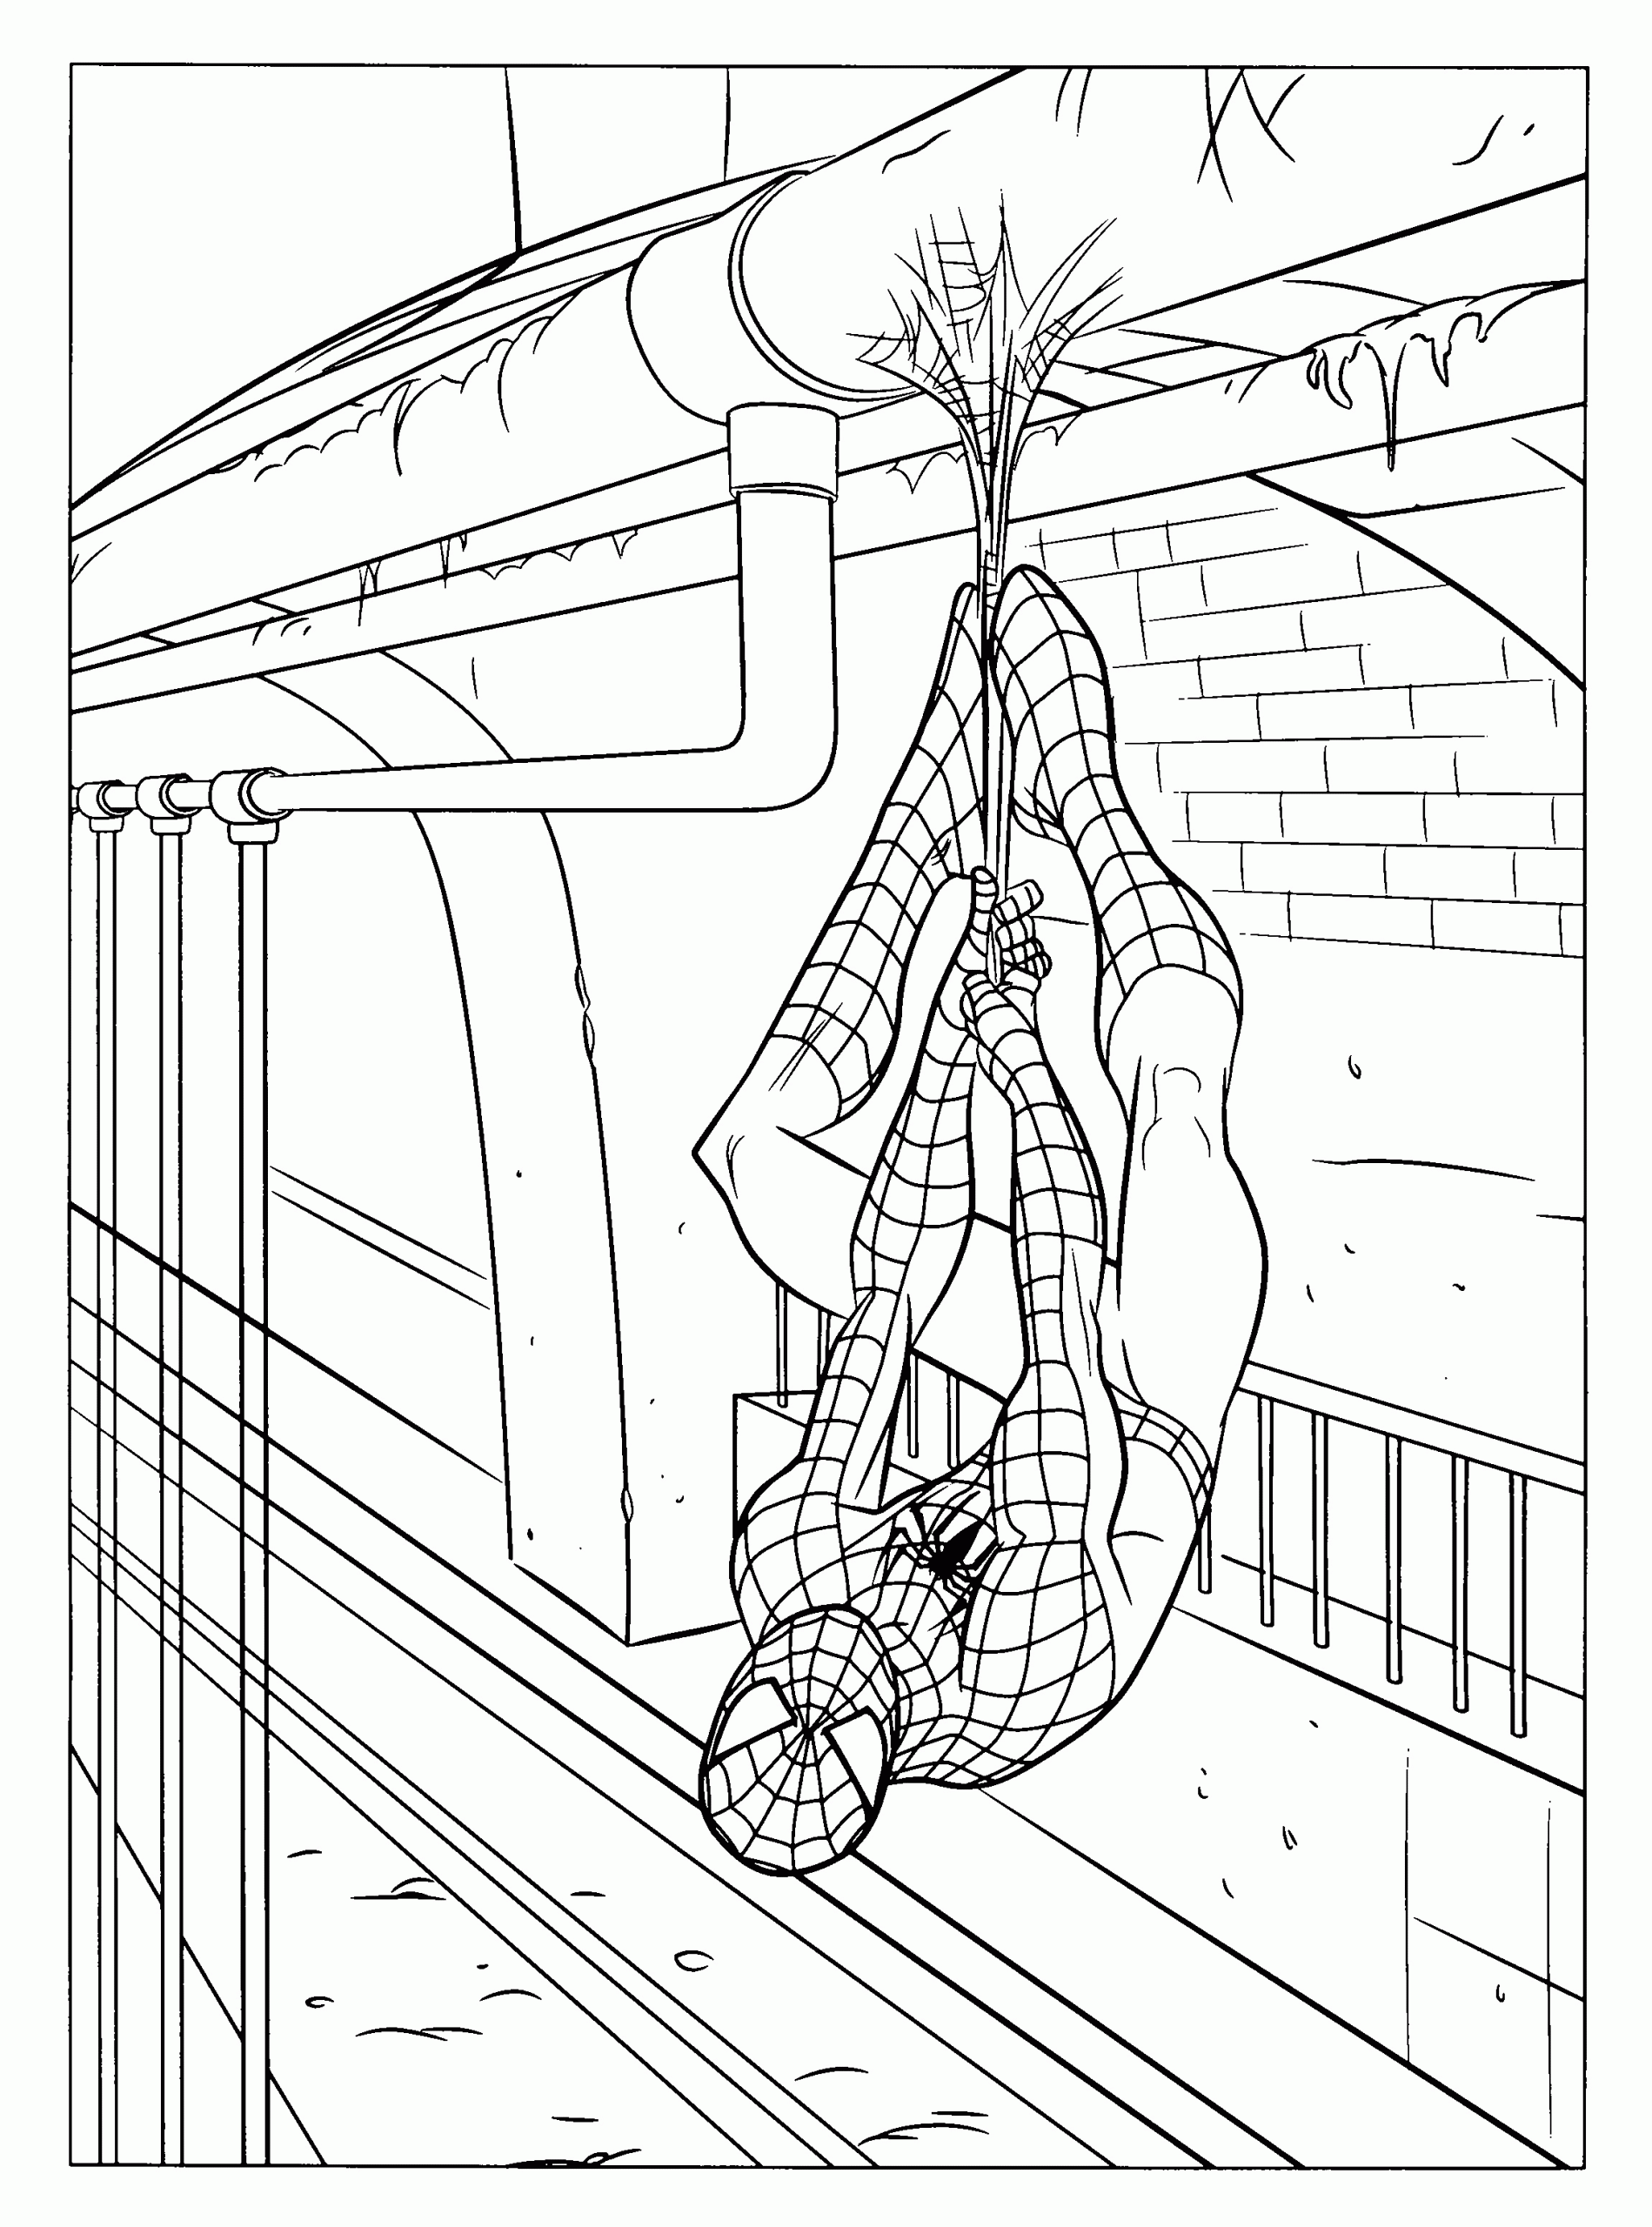 Coloring Pages For Kids Spiderman
 Spiderman 3 Coloring Pages Coloringpages1001